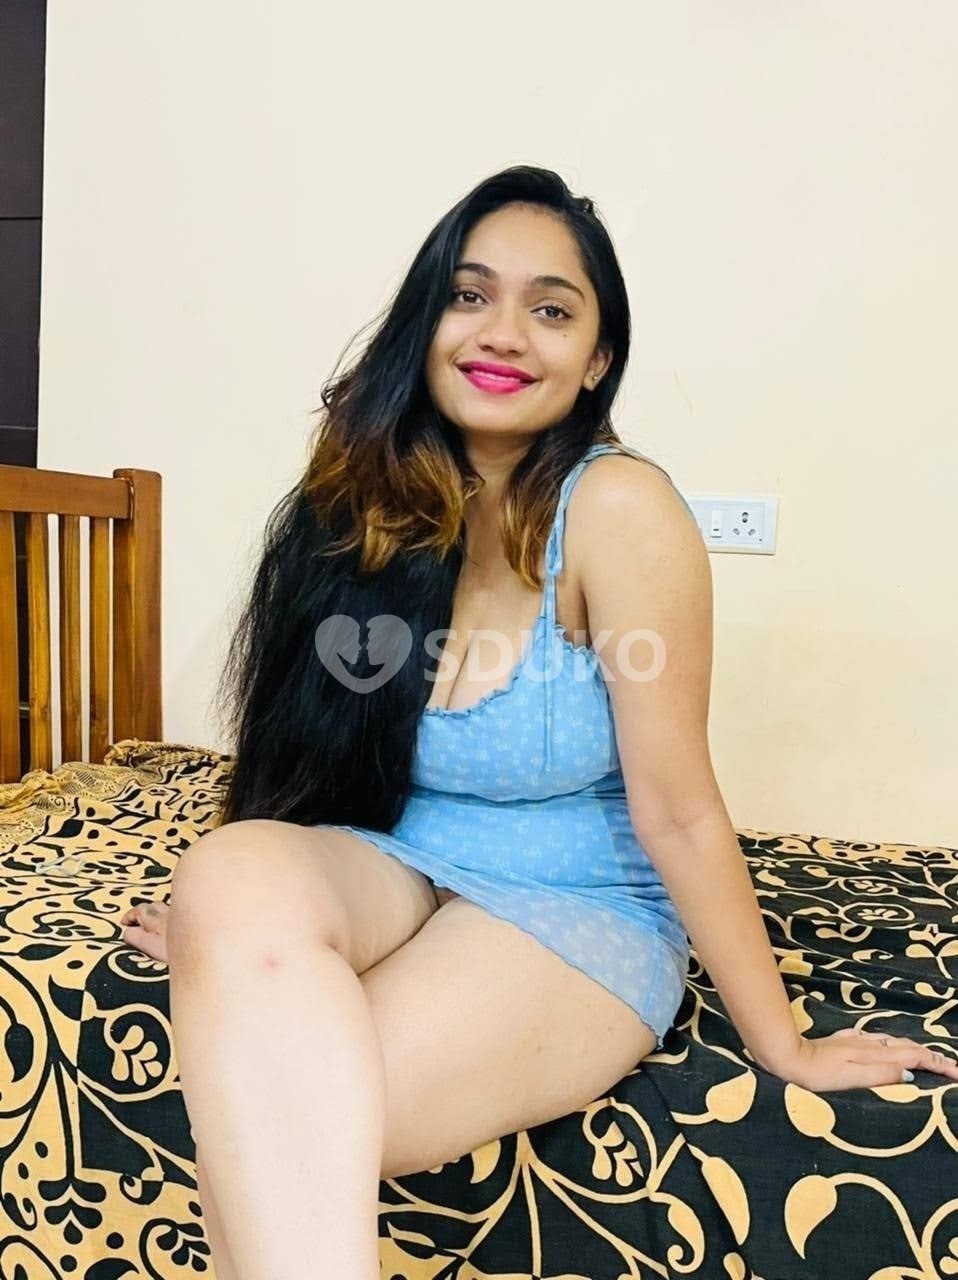 Chandrapur ❤️✨✨✨💯low Best call girl service in low price high profile call girls available call me anytime 